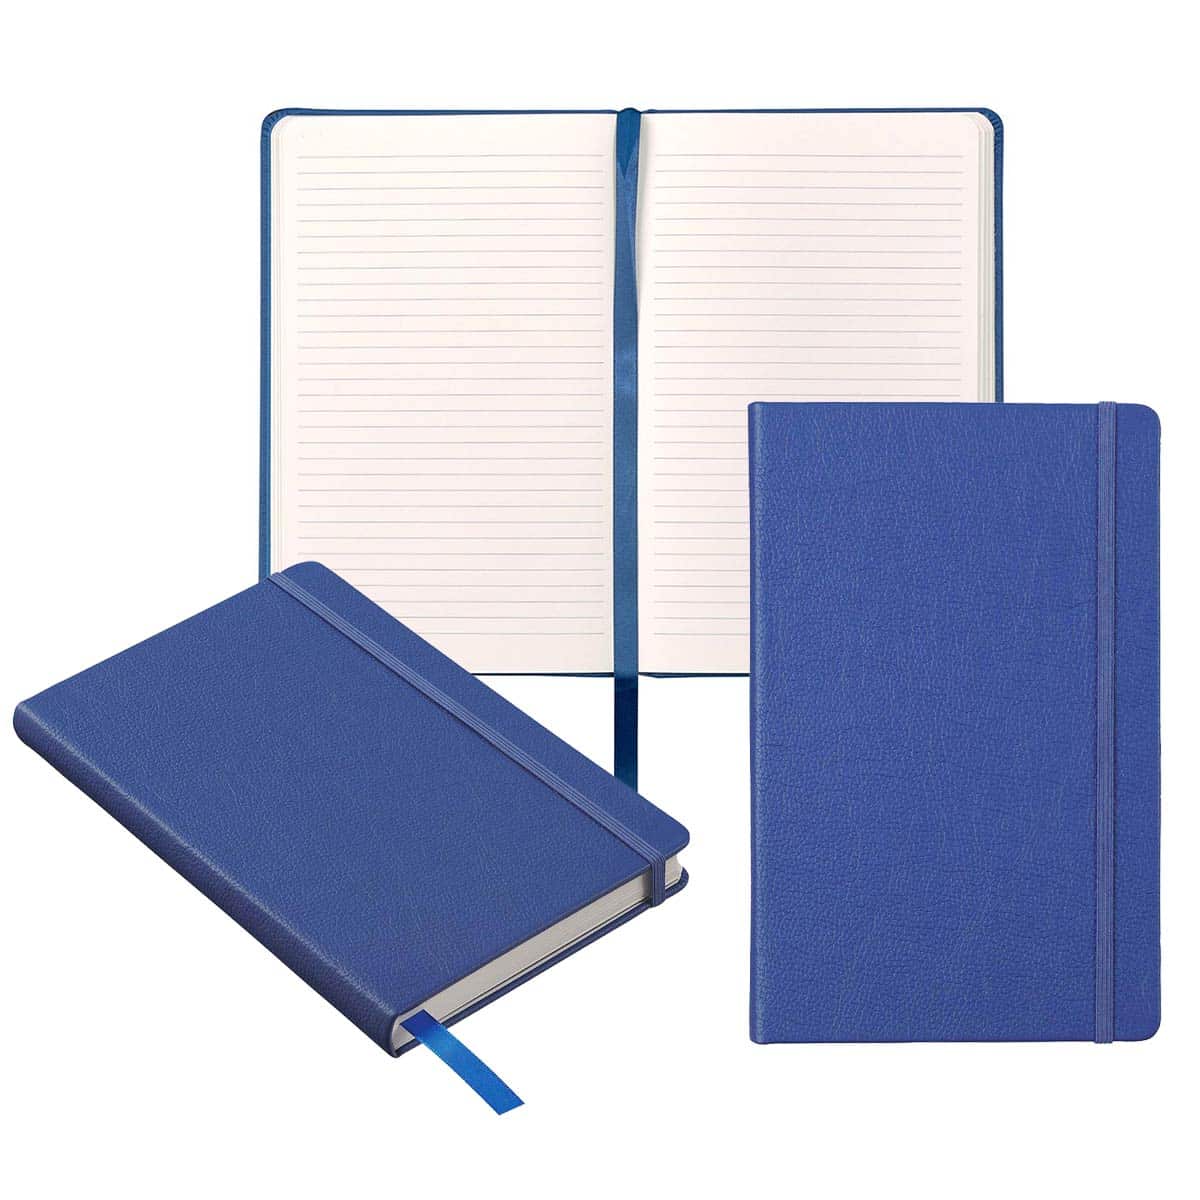 Three view collage of Pacific Blue notebook, open with ribbon marker, front view, and diagonal closed view of binding and lower edge of notebook